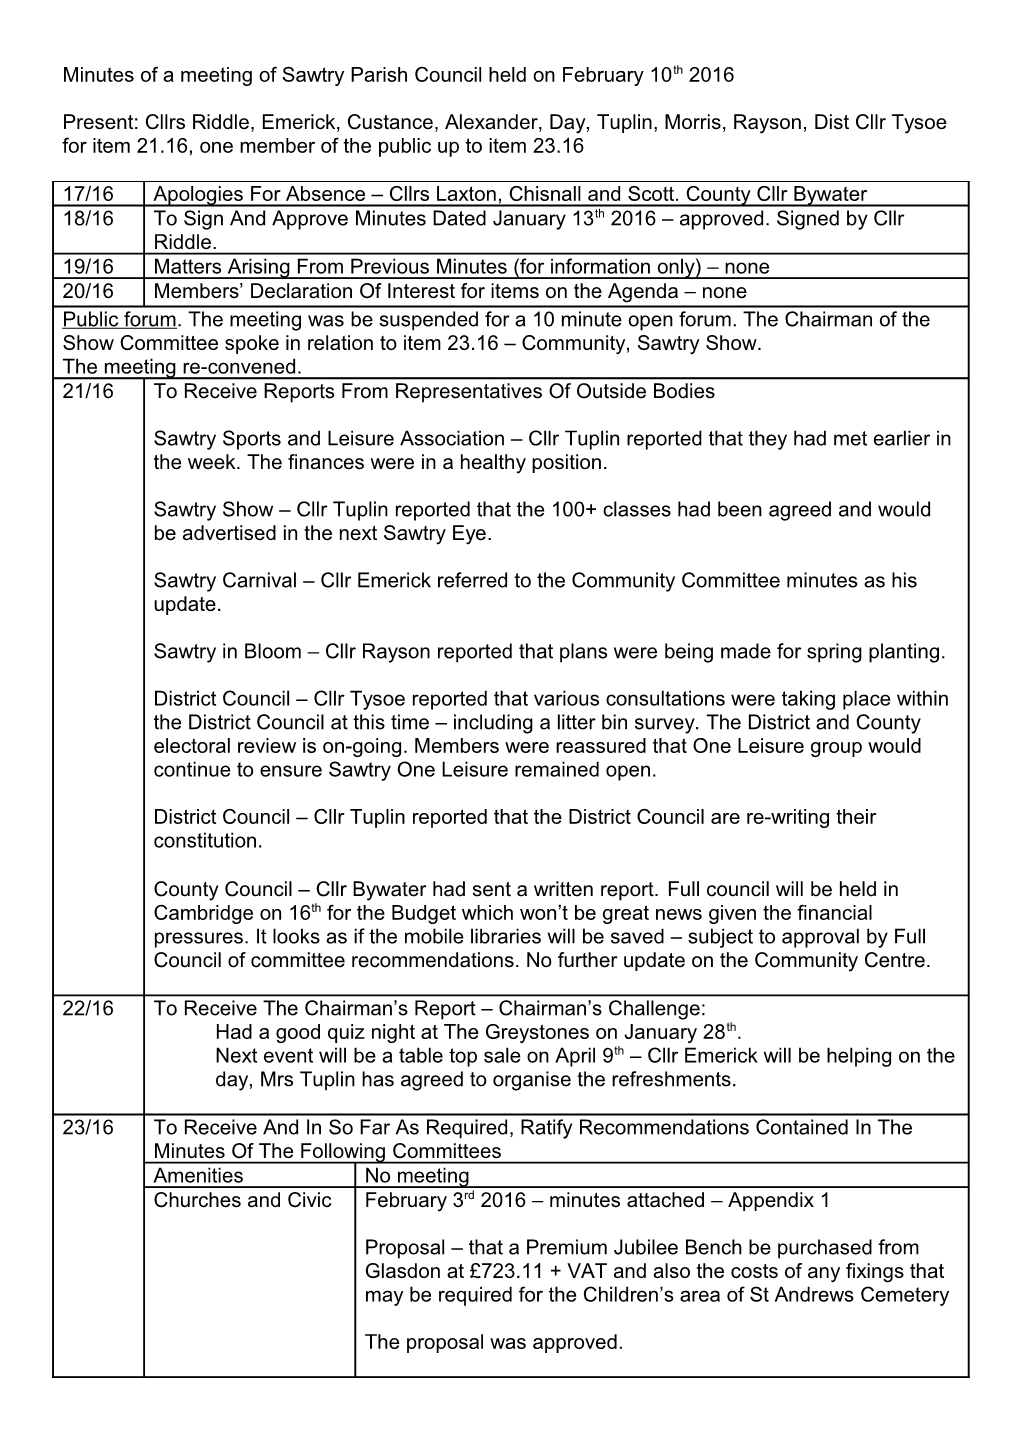 Minutes of a Meeting of Sawtry Parish Council Held on February 10Th 2016